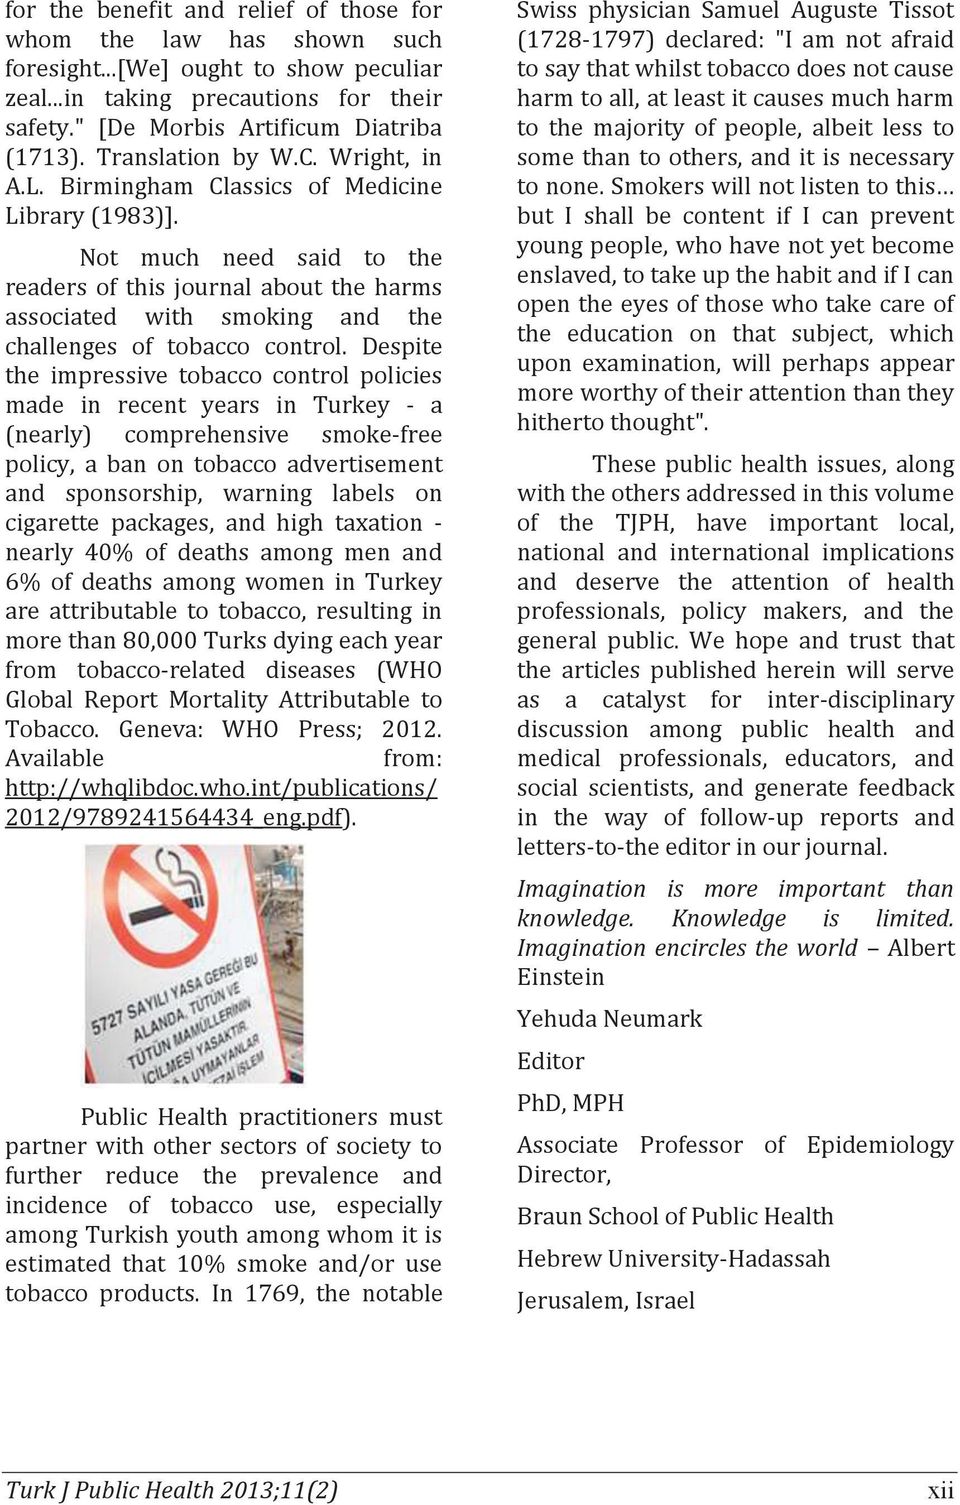 Not much need said to the readers of this journal about the harms associated with smoking and the challenges of tobacco control.